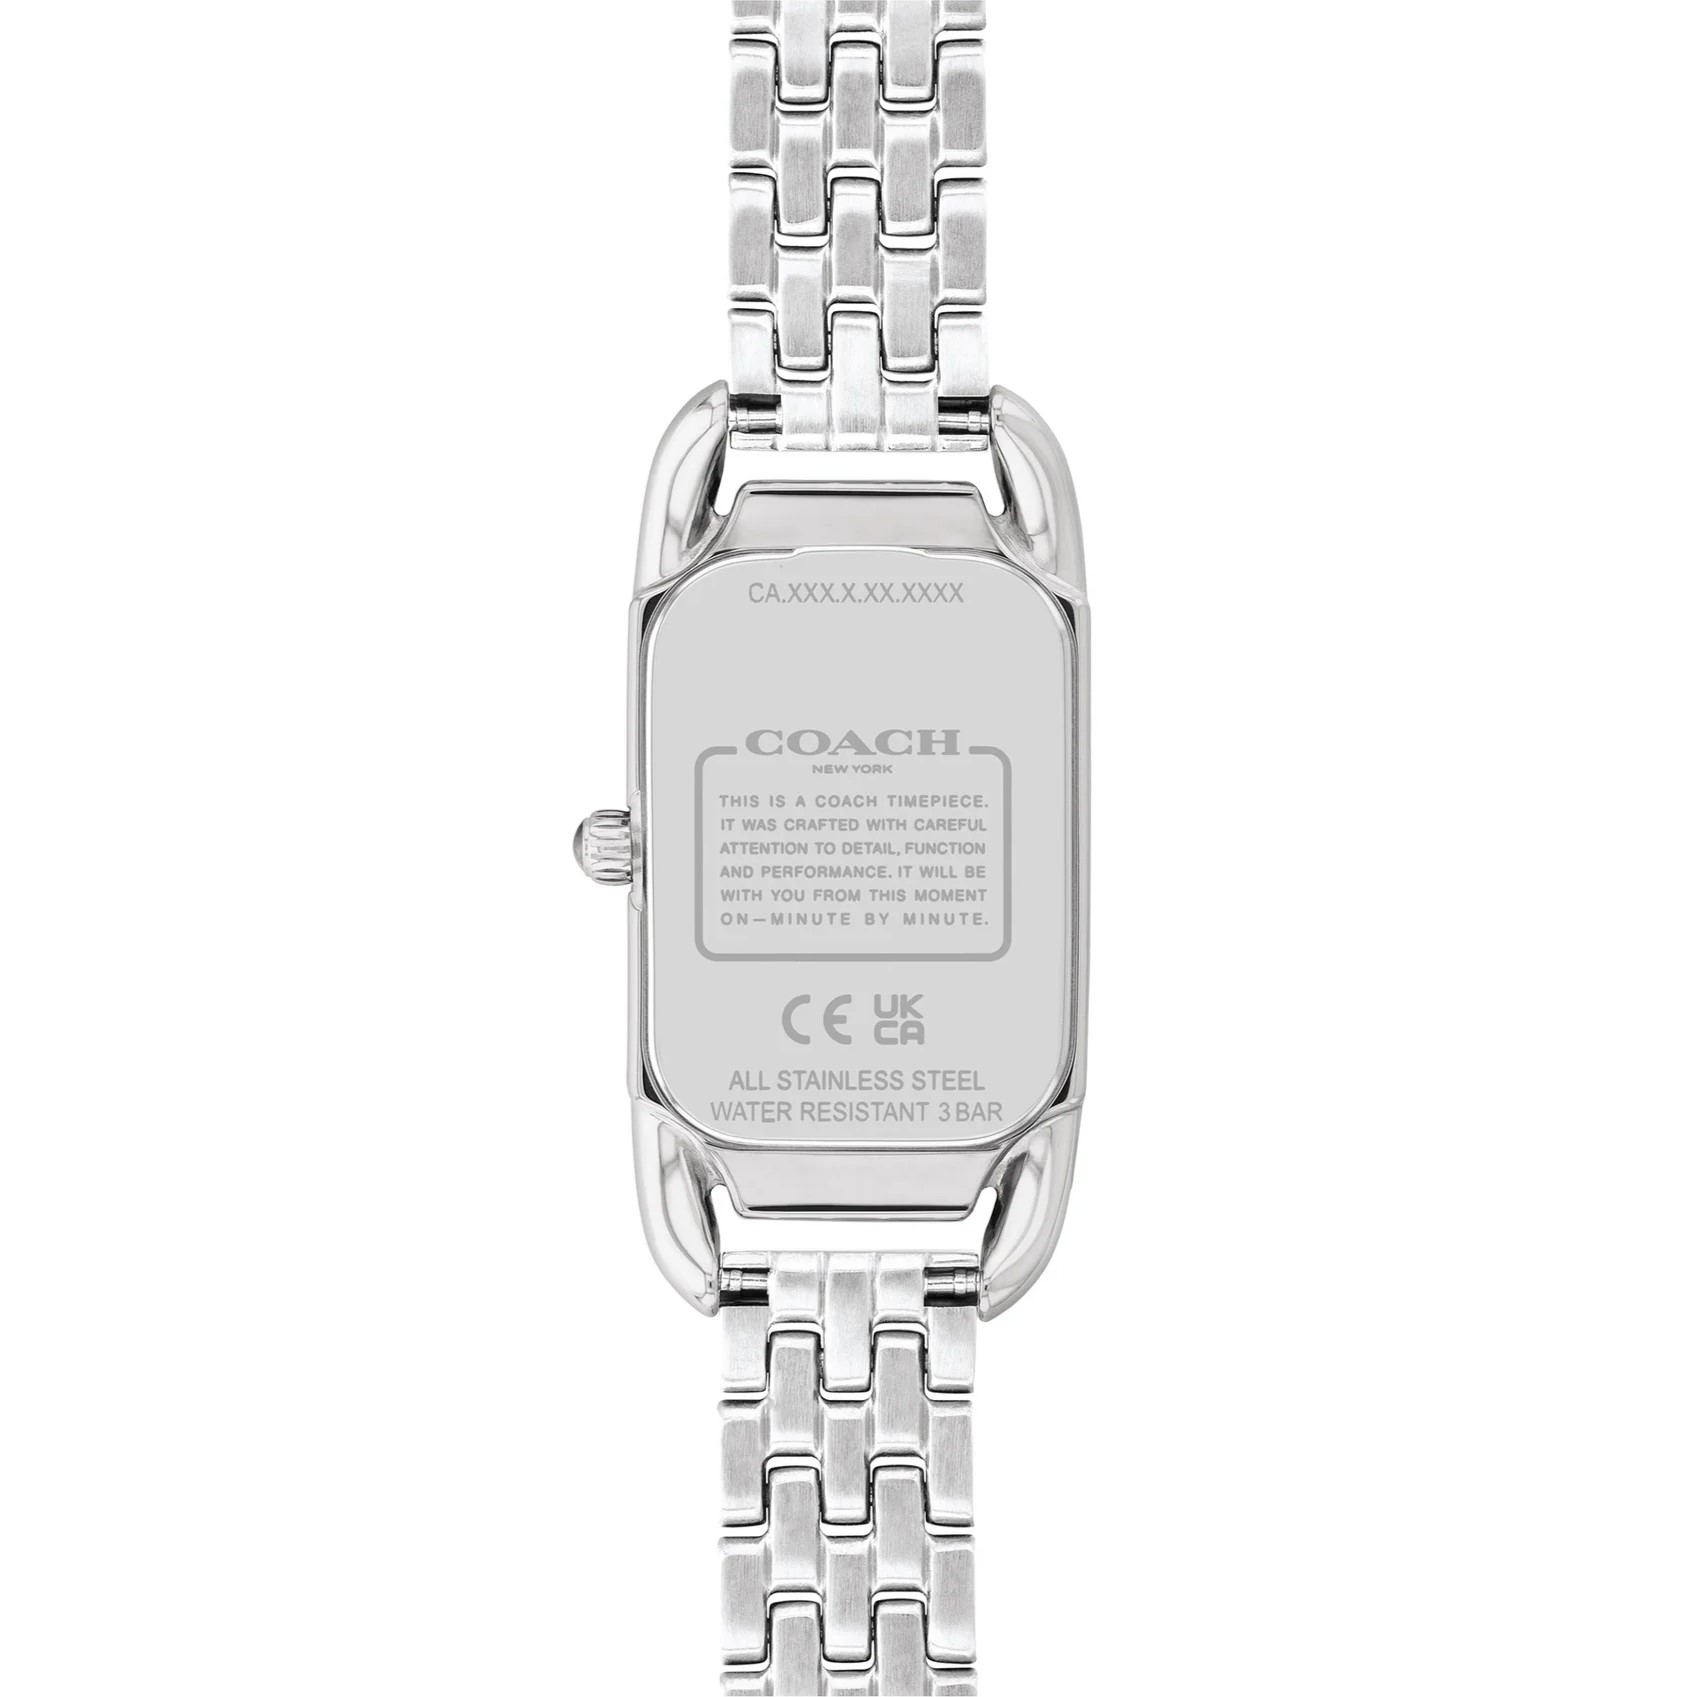 ĐỒNG HỒ ĐEO TAY NỮ COACH CADIE SILVER STAINLESS STEEL WHITE DIAL WOMENS WATCH 14504035 7